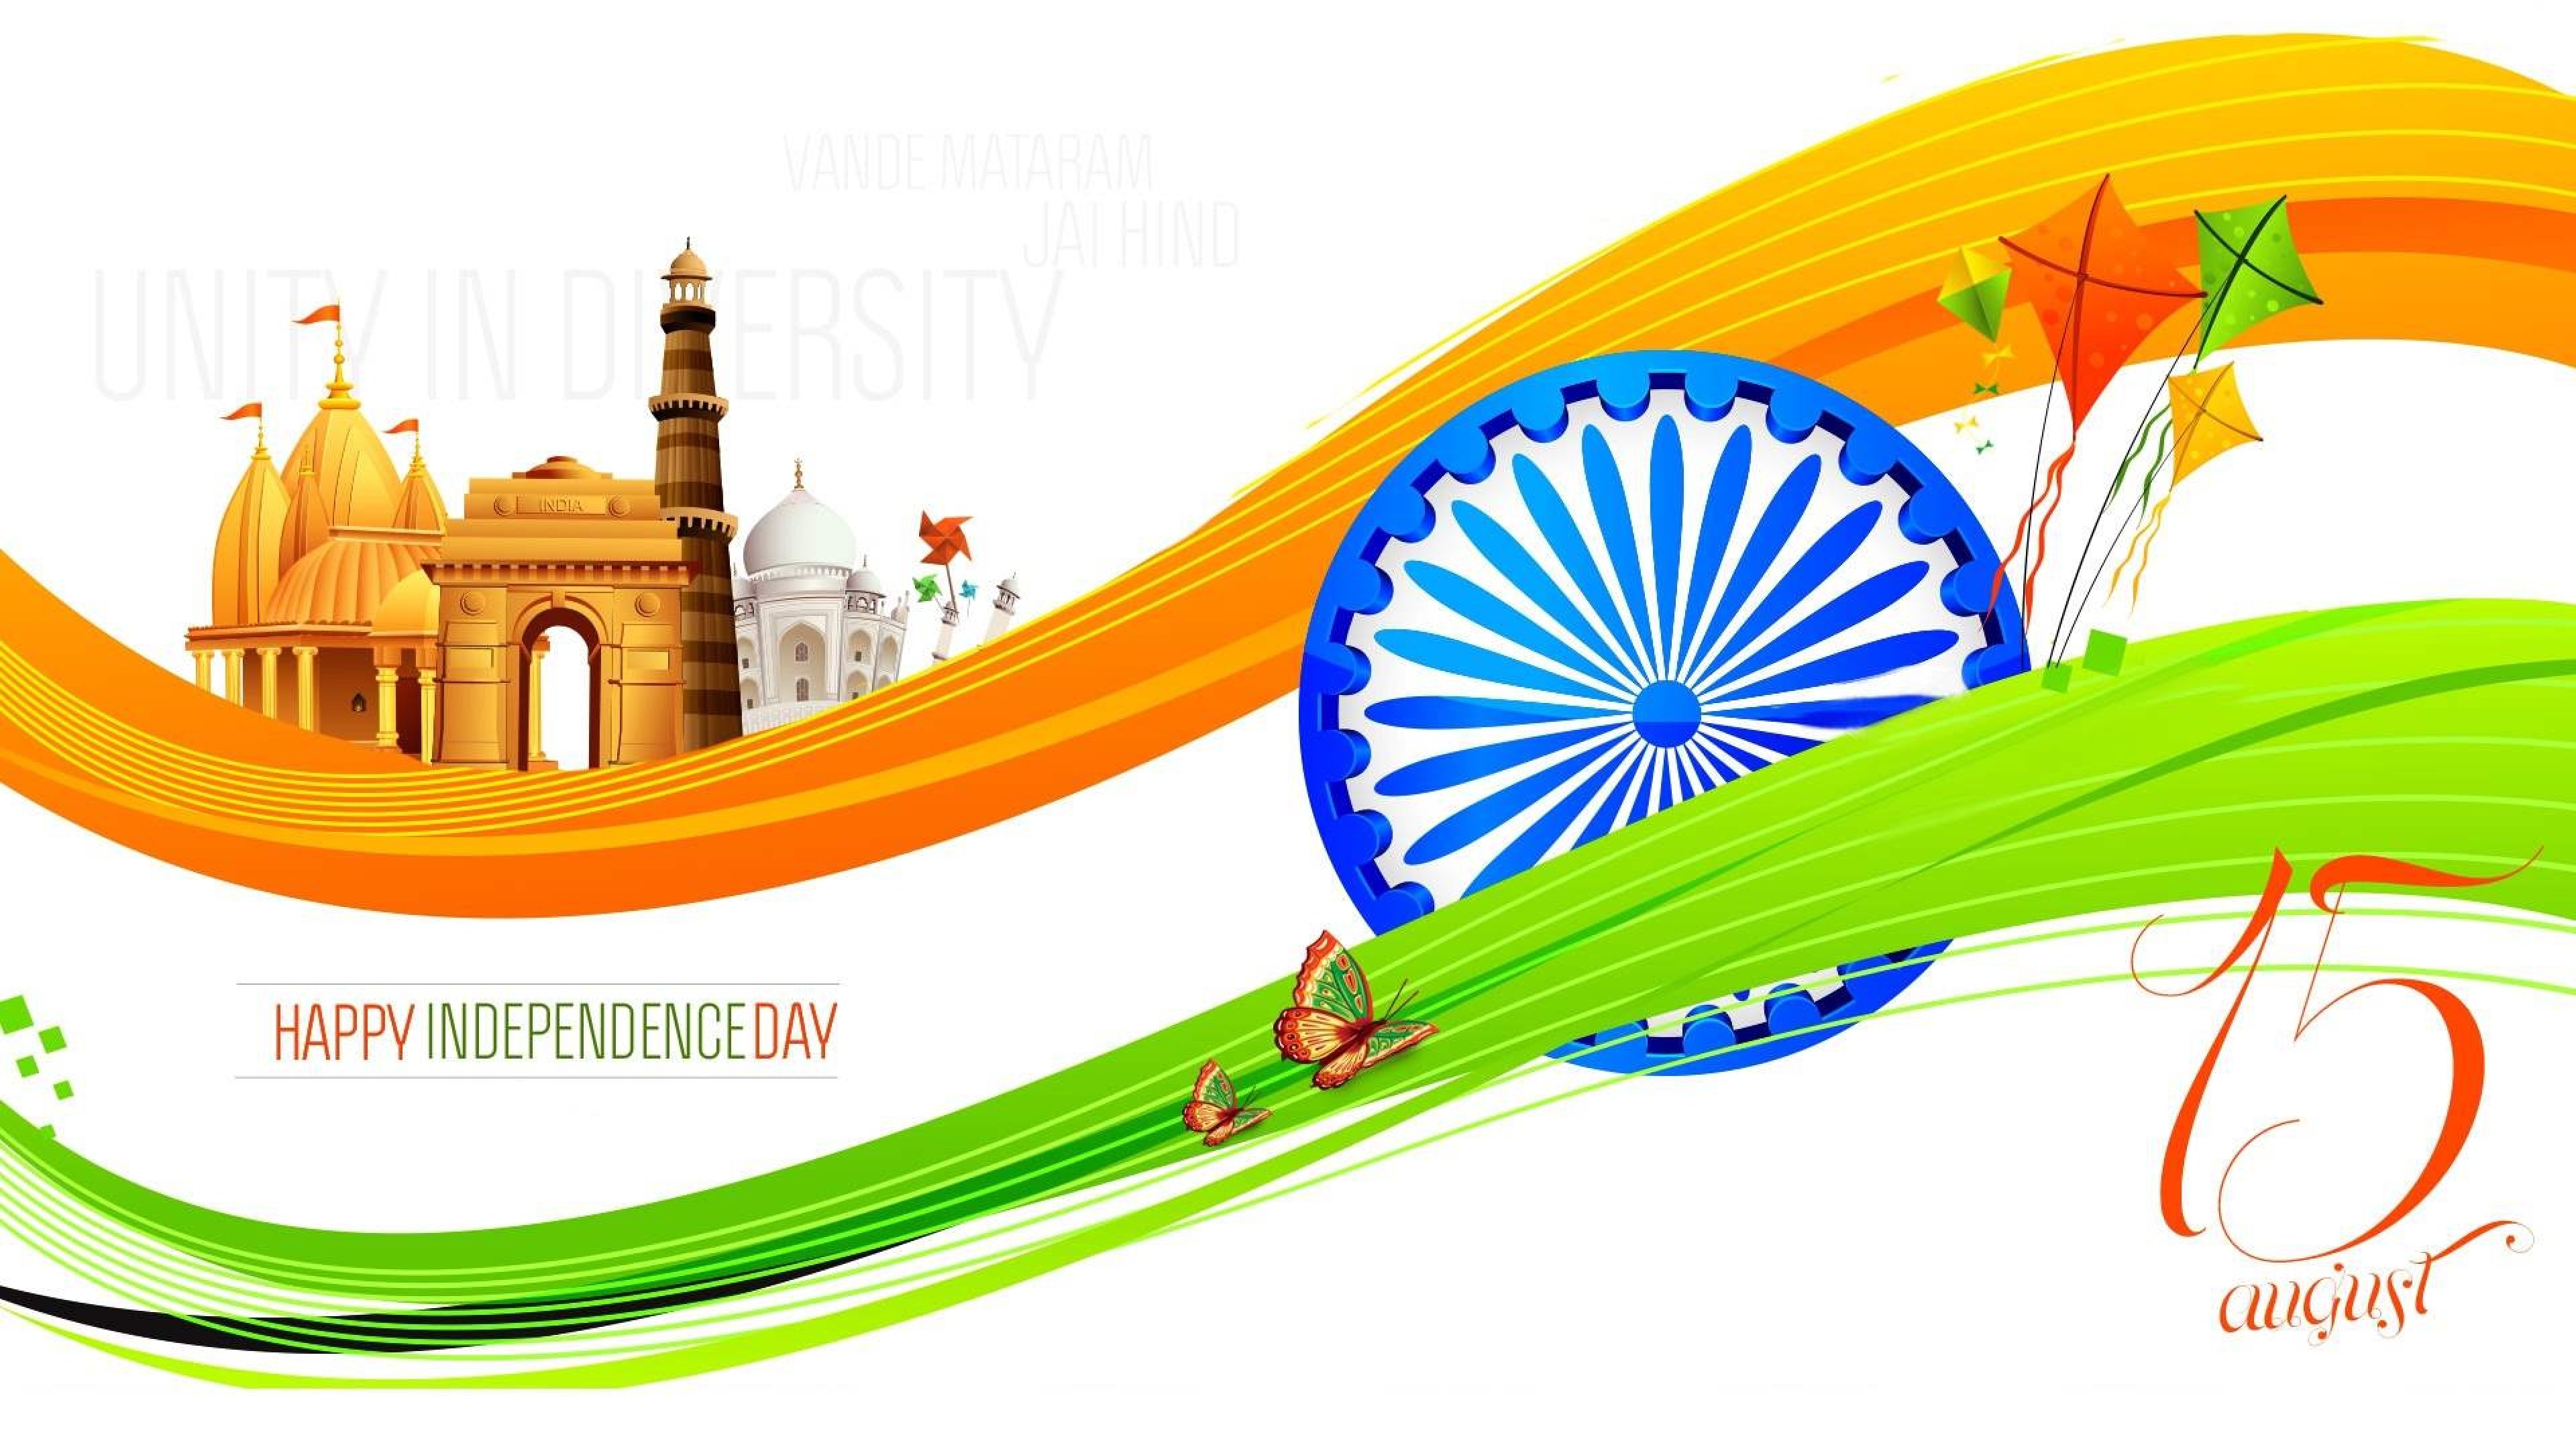 Happy Independence Day 15 August 4k Wallpaper - Independence Day Banner Designs - HD Wallpaper 